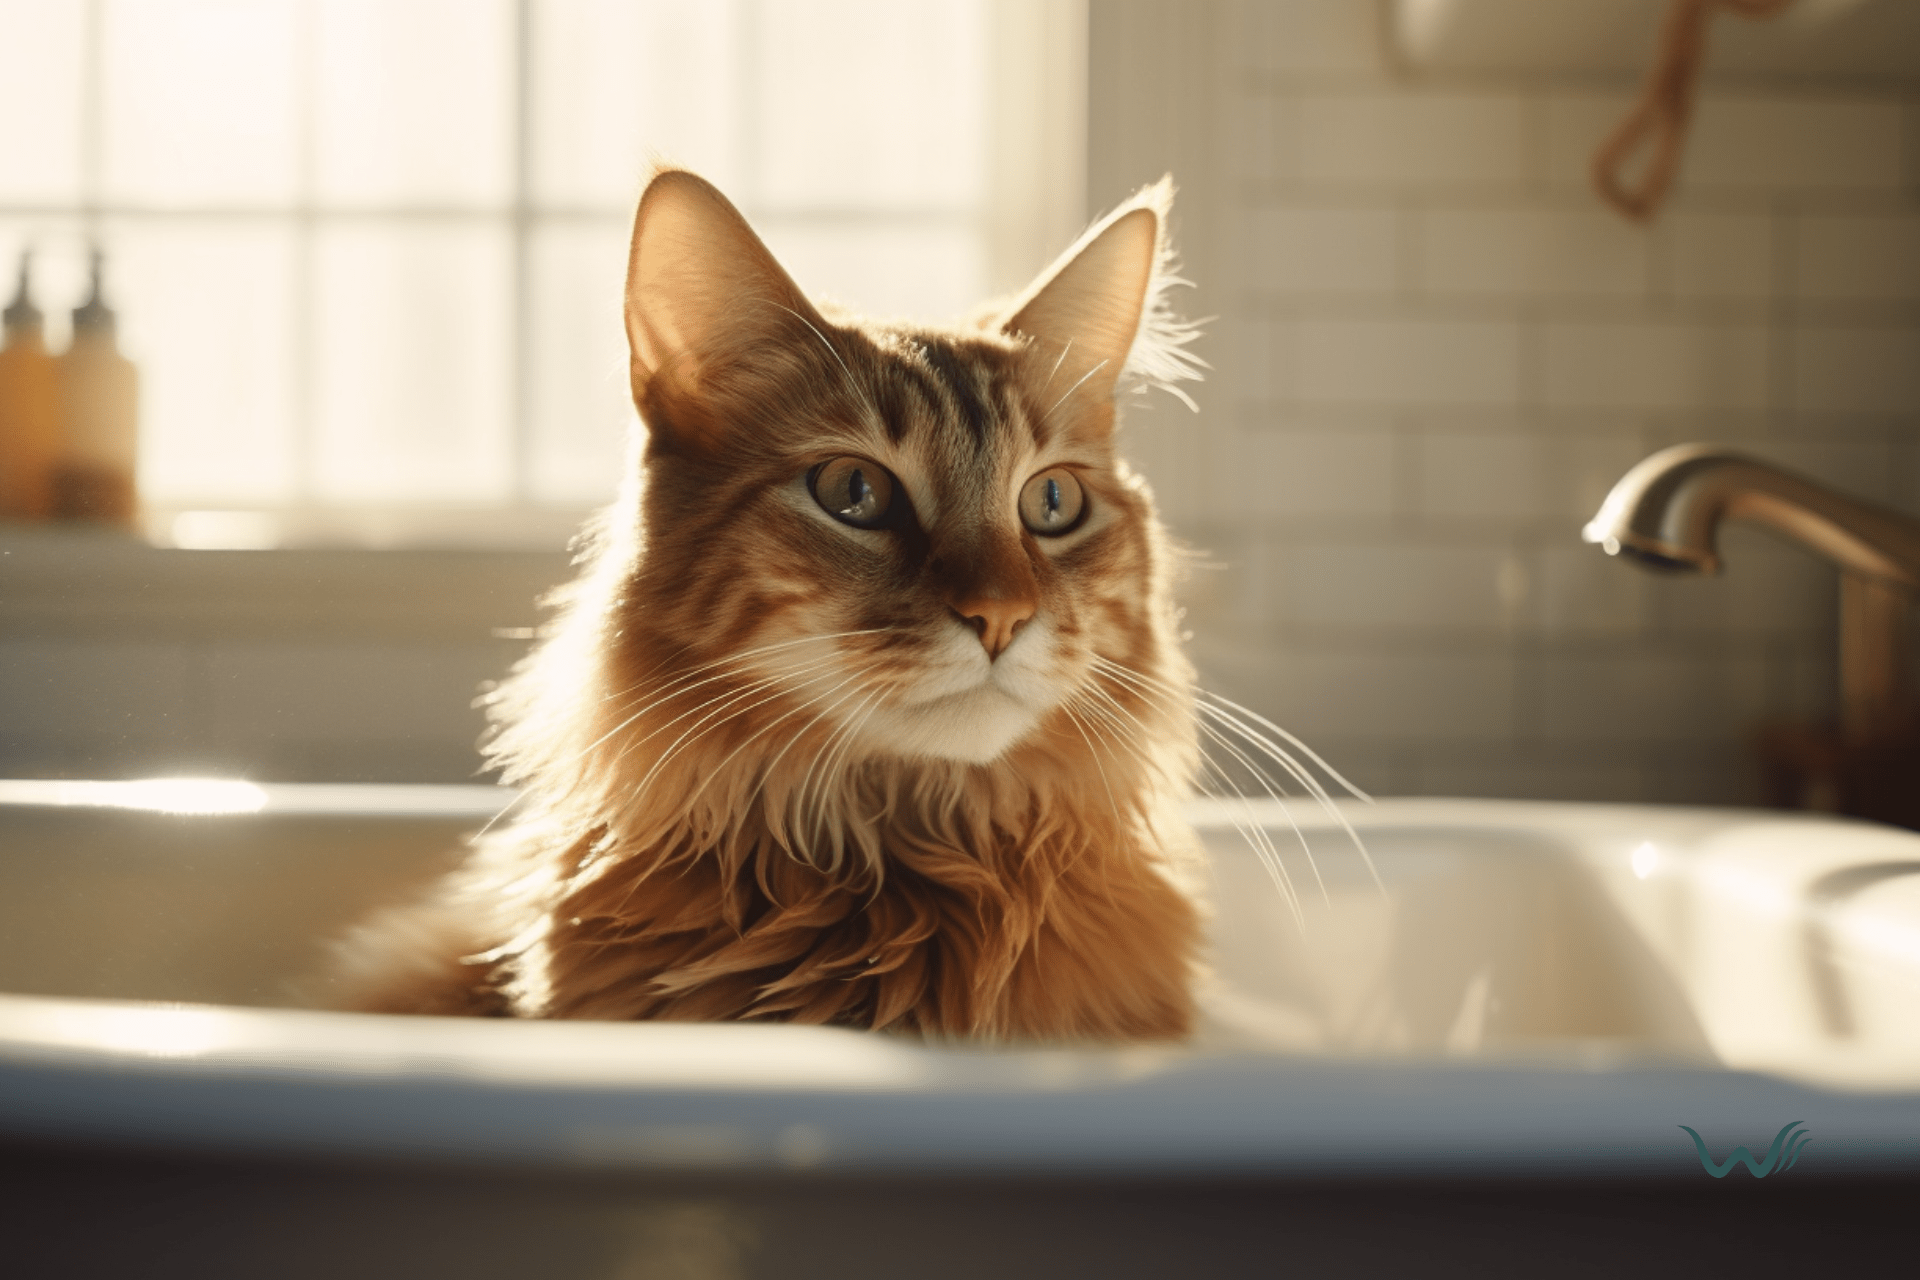 7 steps for bathing a cat